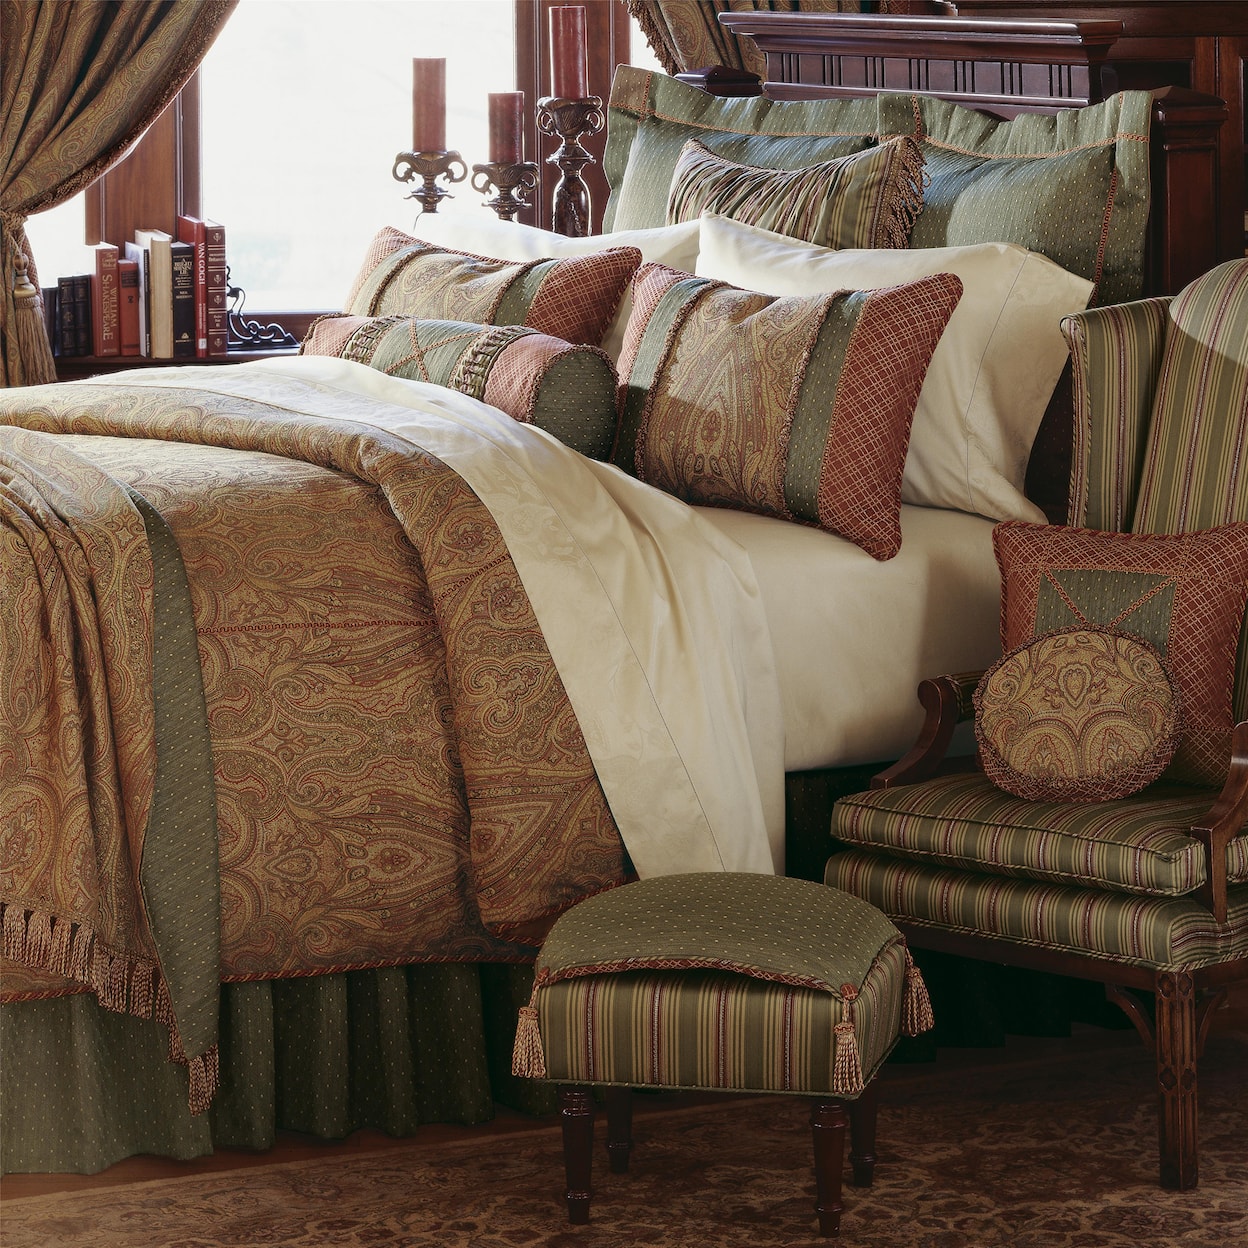 Eastern Accents Glenwood Full Button-Tufted Comforter